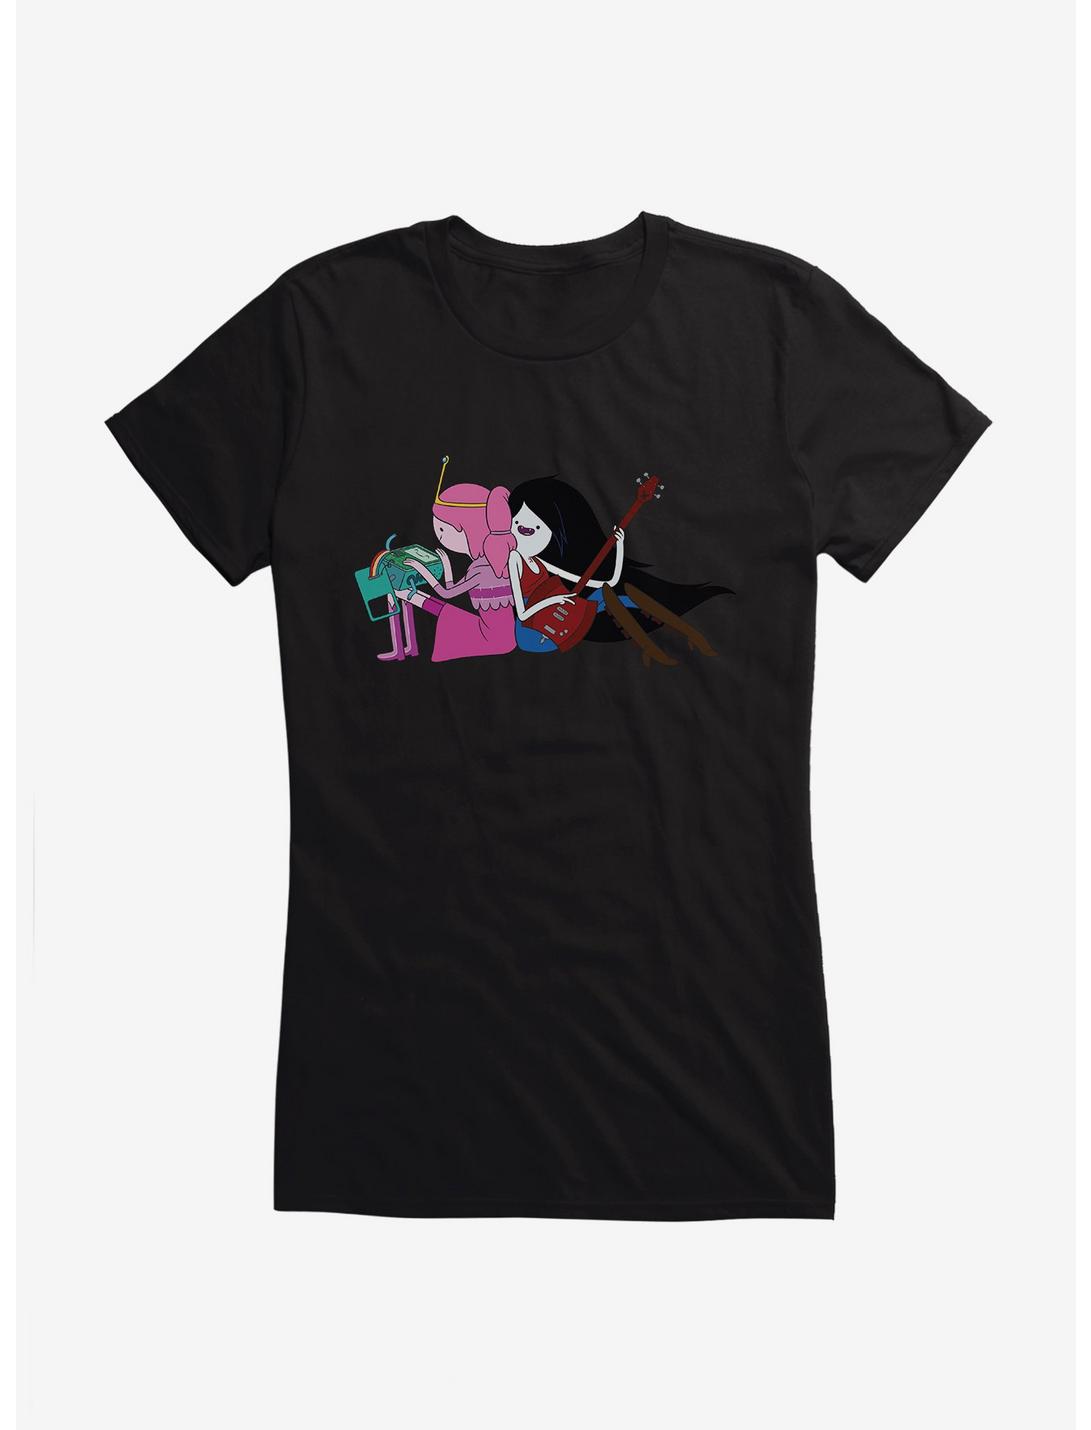 Adventure Time Princess And Vampire Queen Girls T-Shirt, BLACK, hi-res